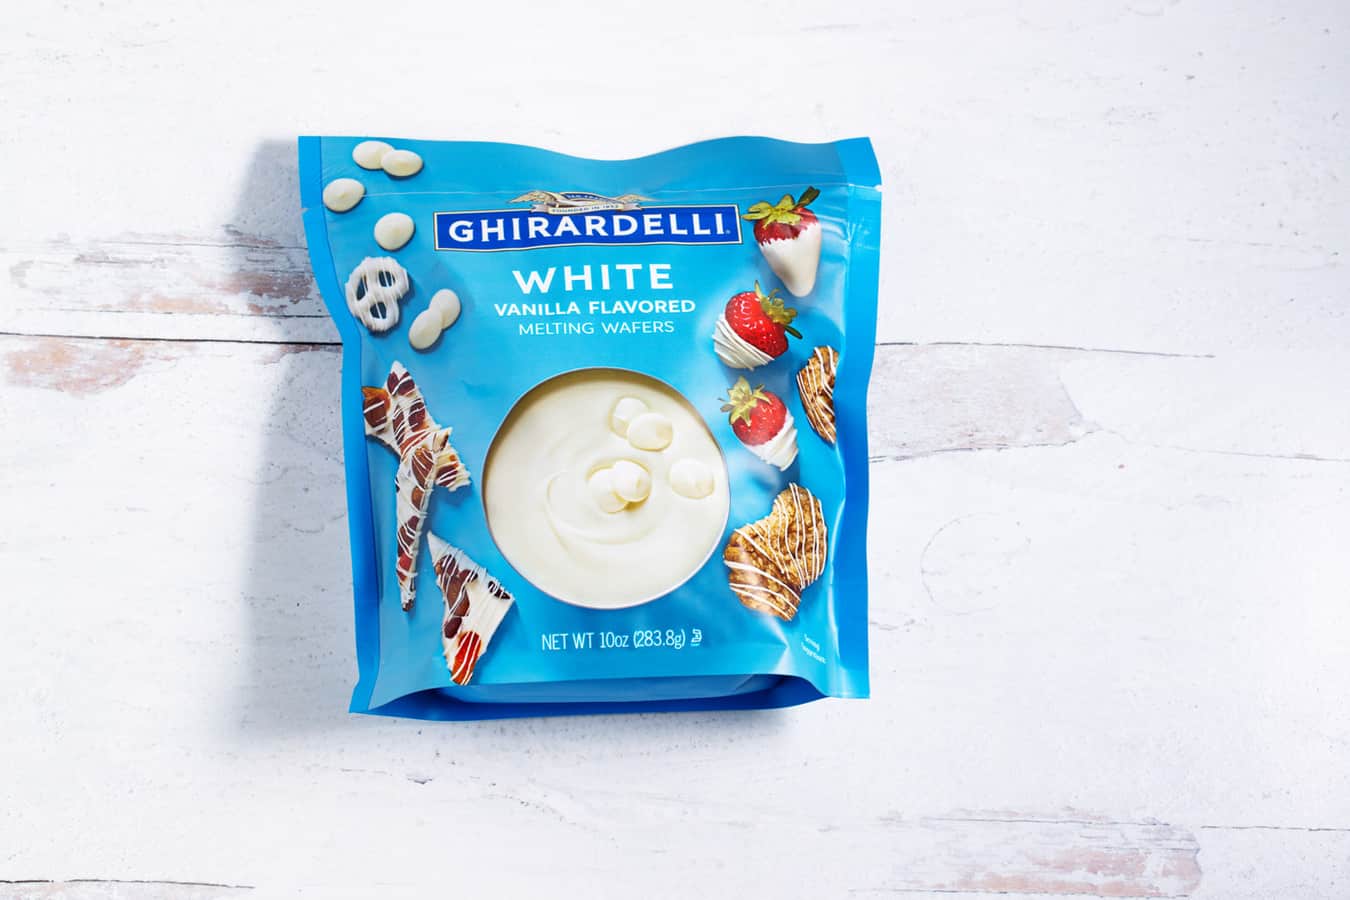 Bag of Ghirardelli white melting wafers.